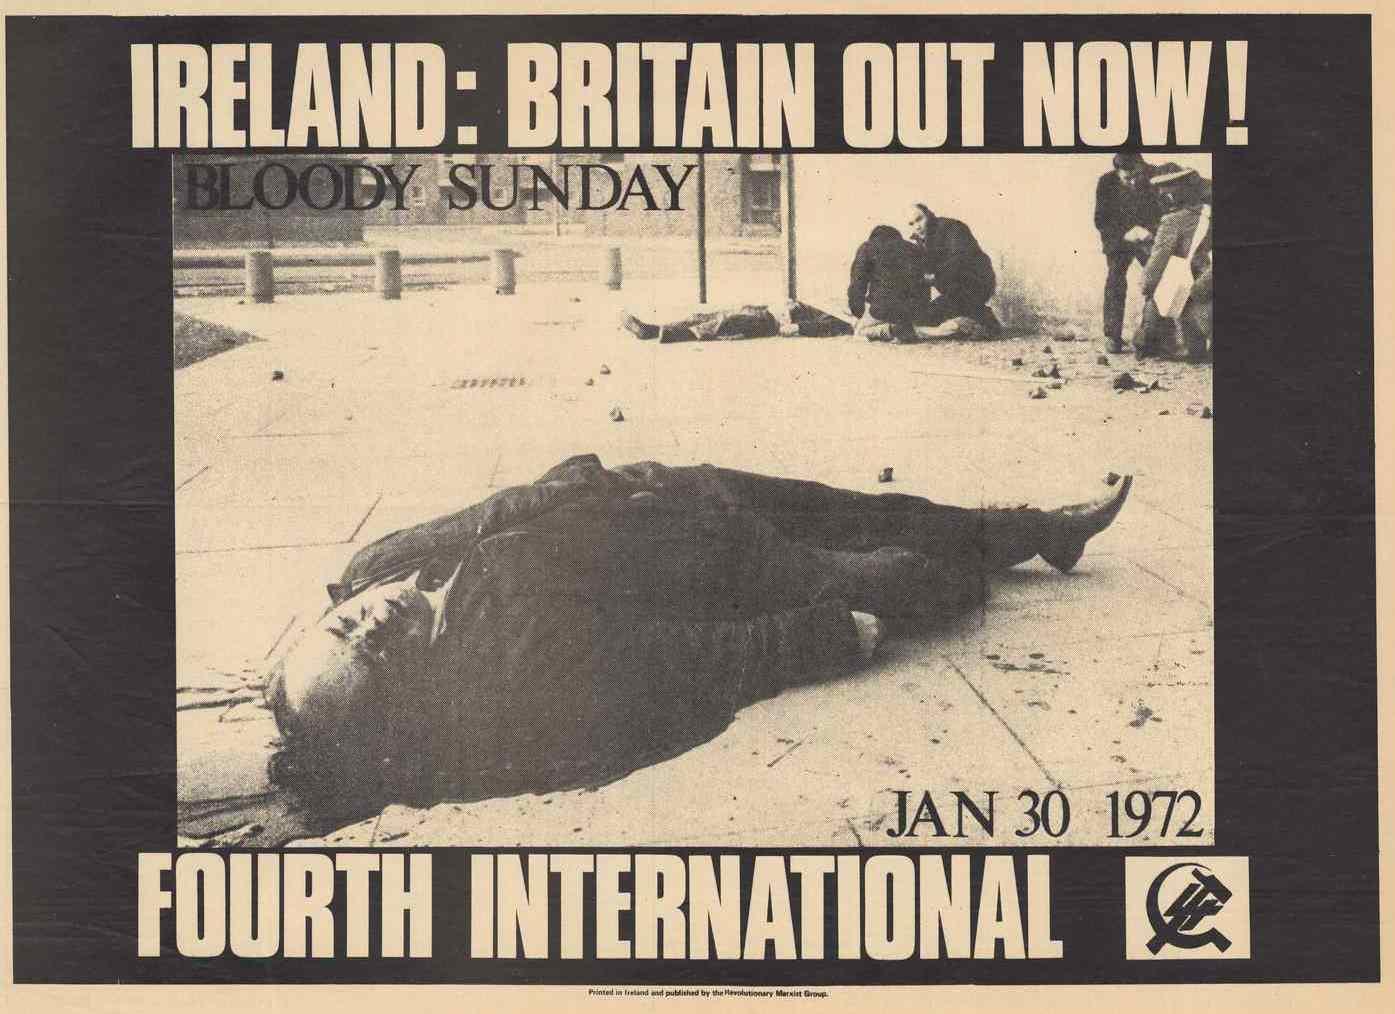 A poster with a photograph of Bloody Sunday victims lying on the street. The text reads: Ireland: Britain Out Now!; Bloody Sunday, Jan 30 1972; Fourth International.